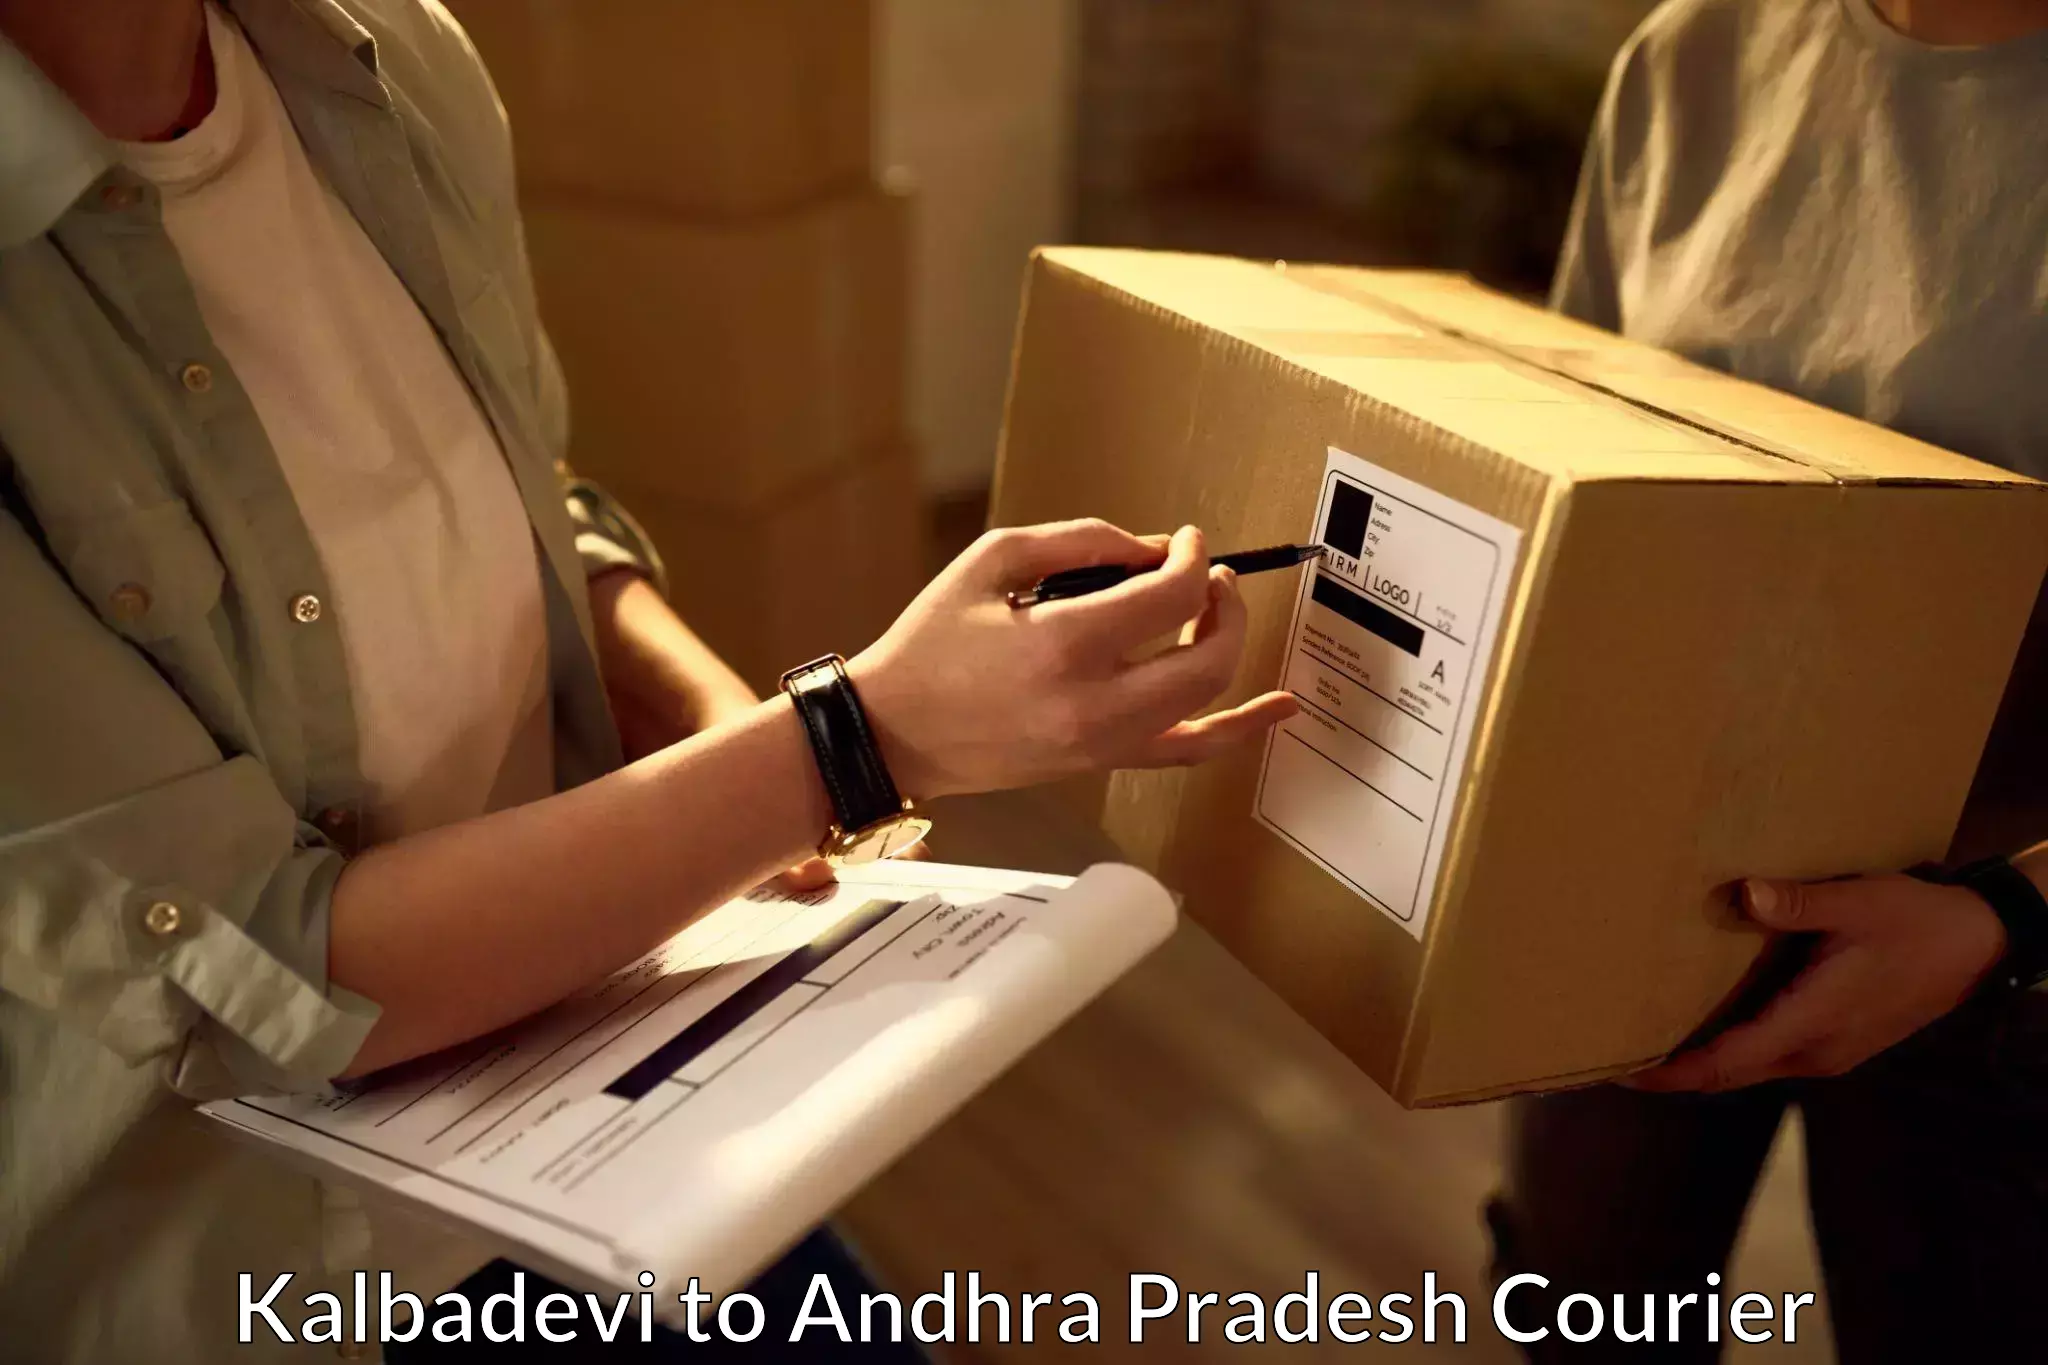 Parcel service for businesses Kalbadevi to Pakala